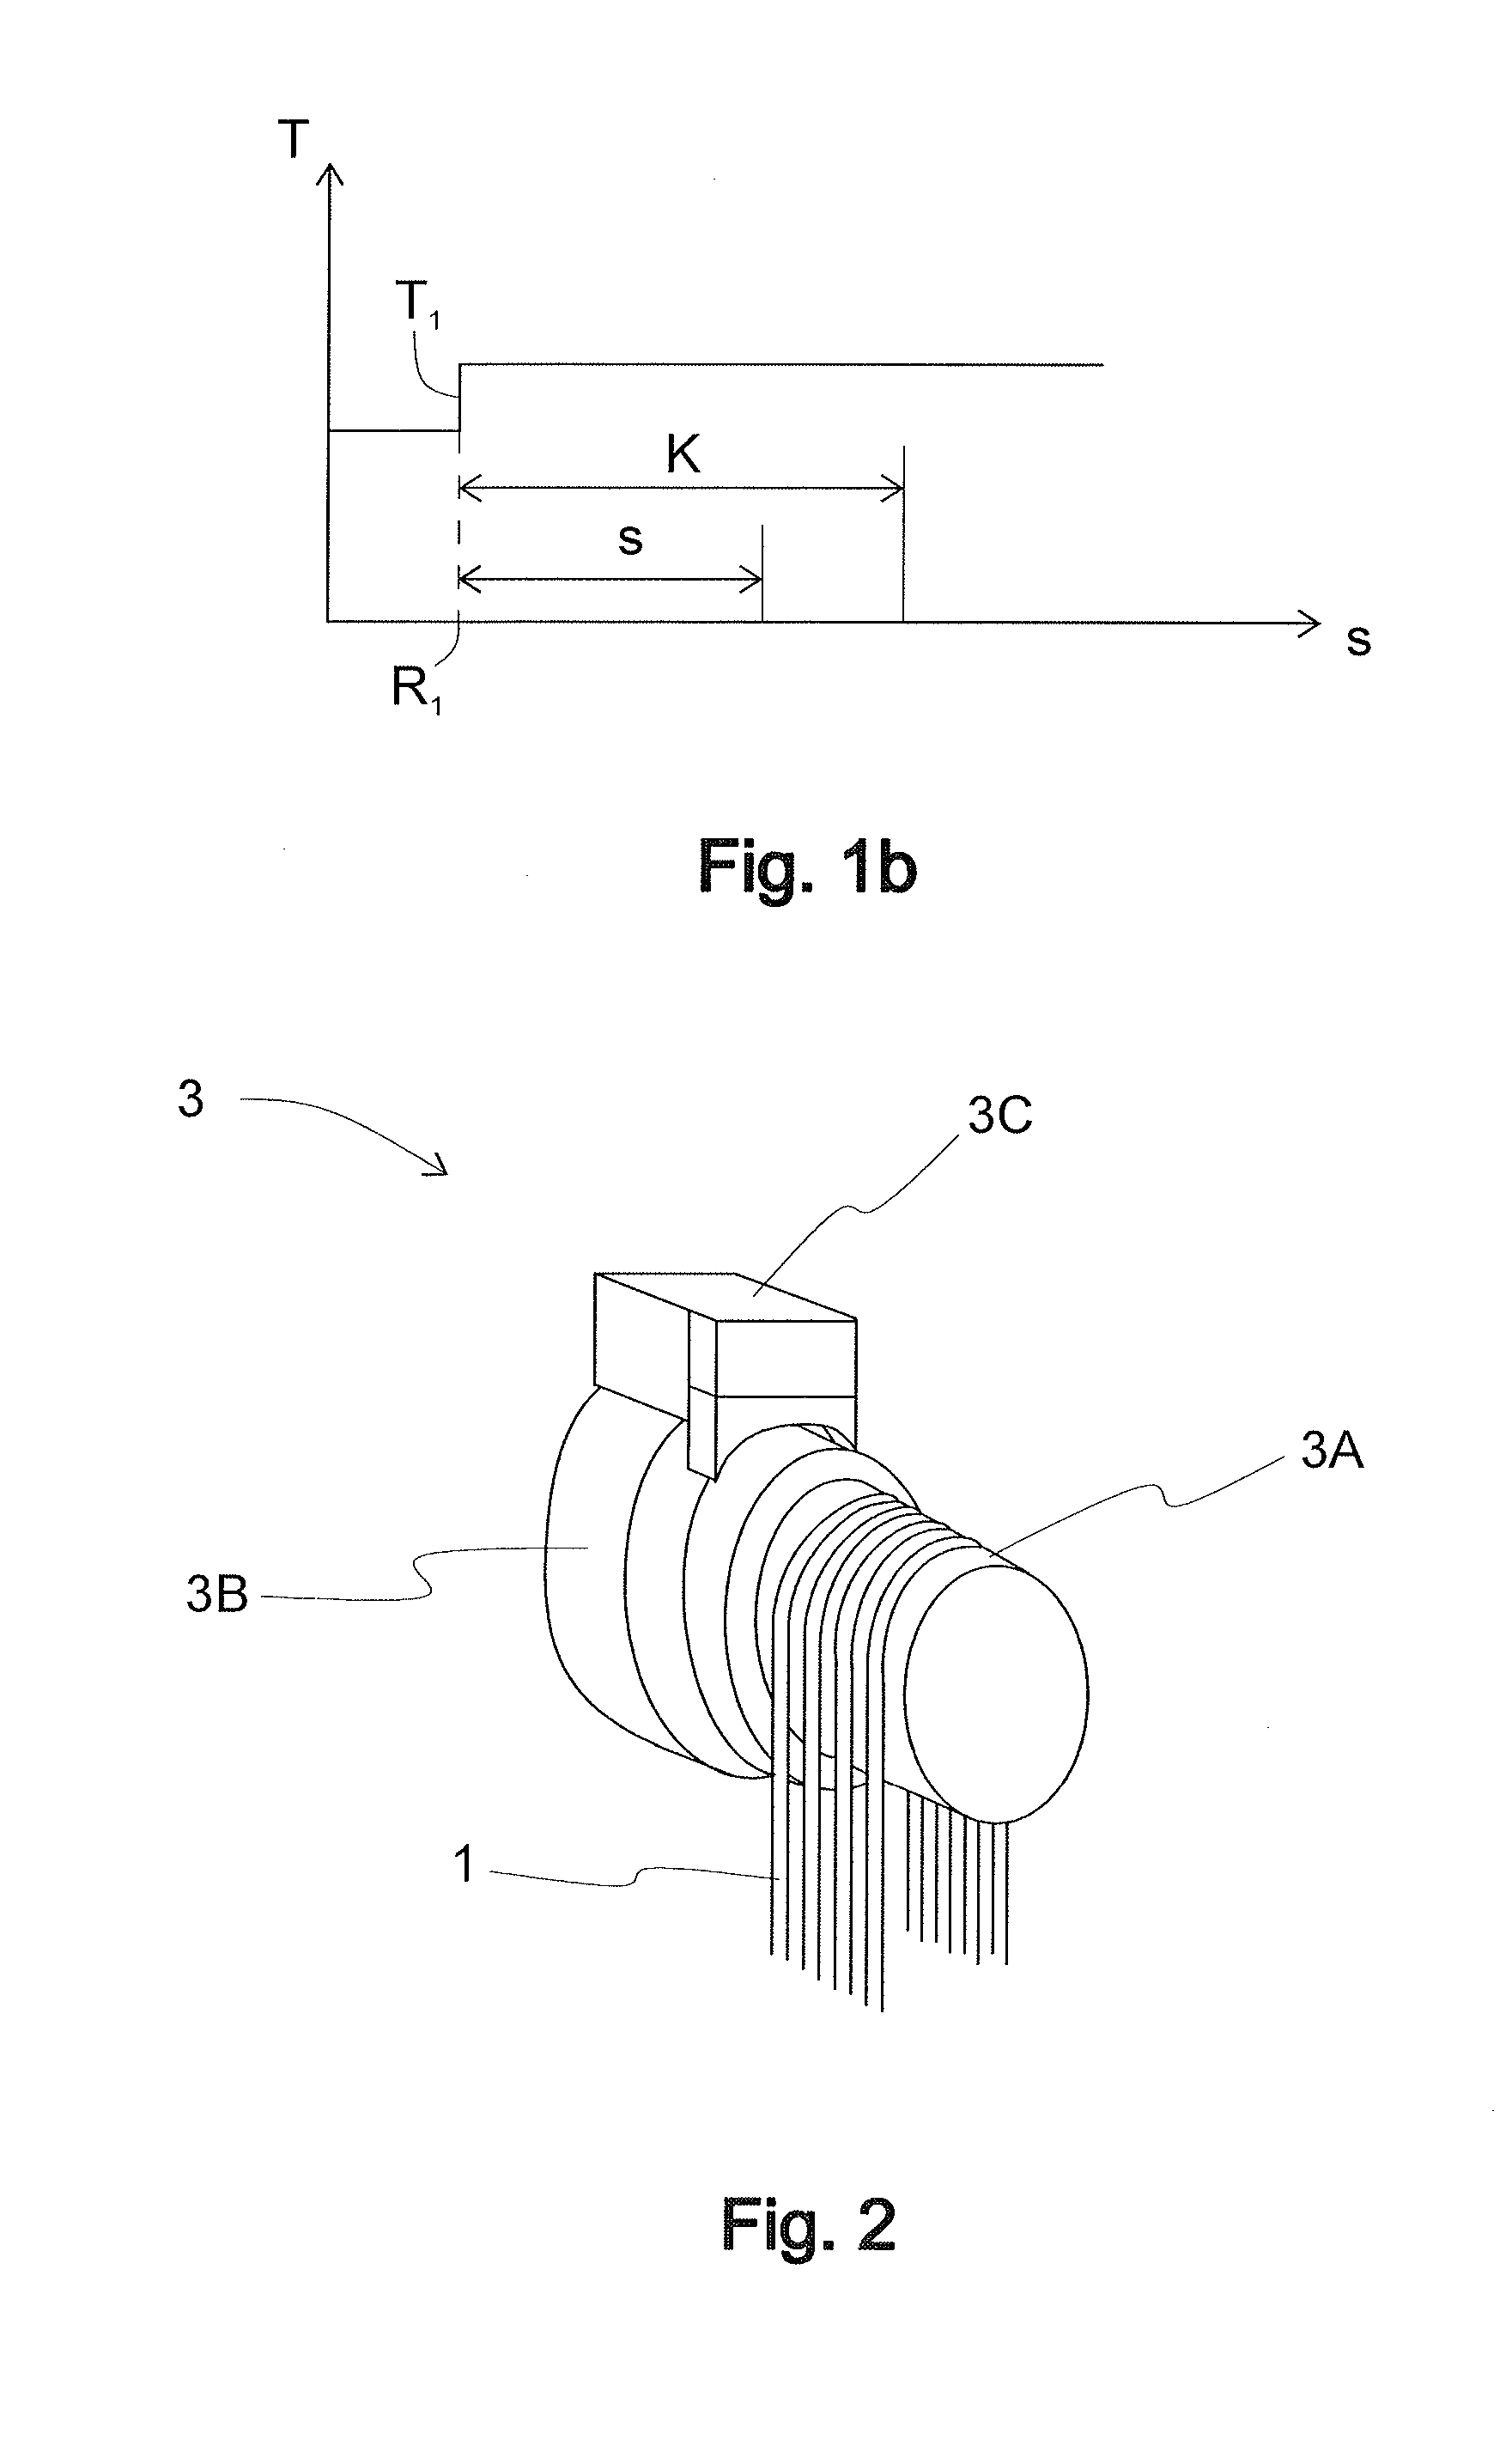 Method and arrangement for monitoring the safety of a counterweighted elevator